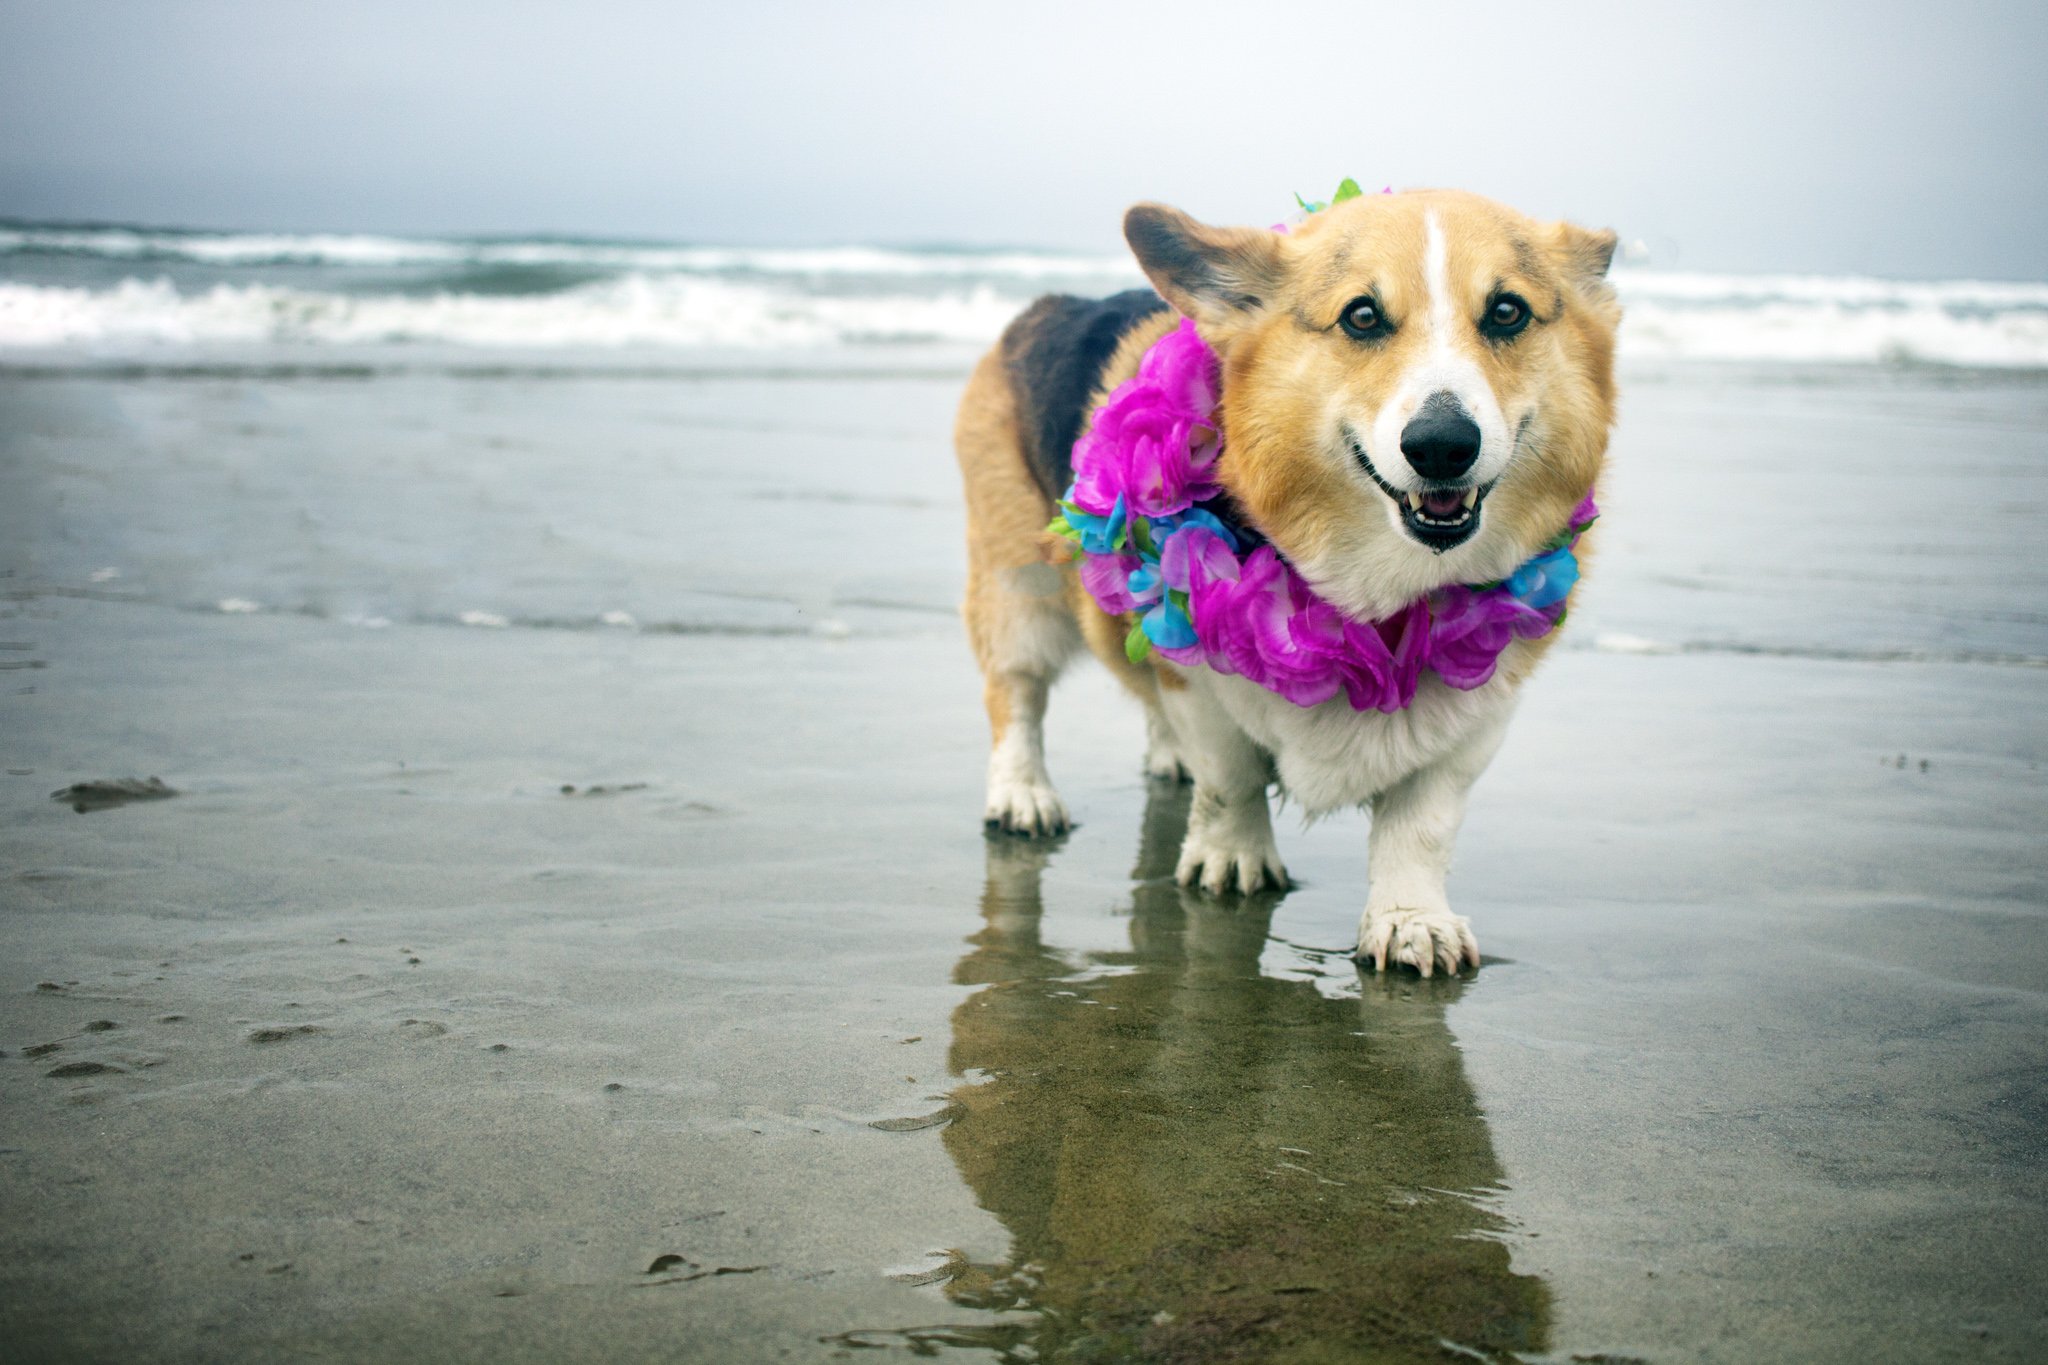 97-Orange County Pet and Dog Photography - by Steamer Lee - Corgi Beach Day - Southern Caliornia.JPG